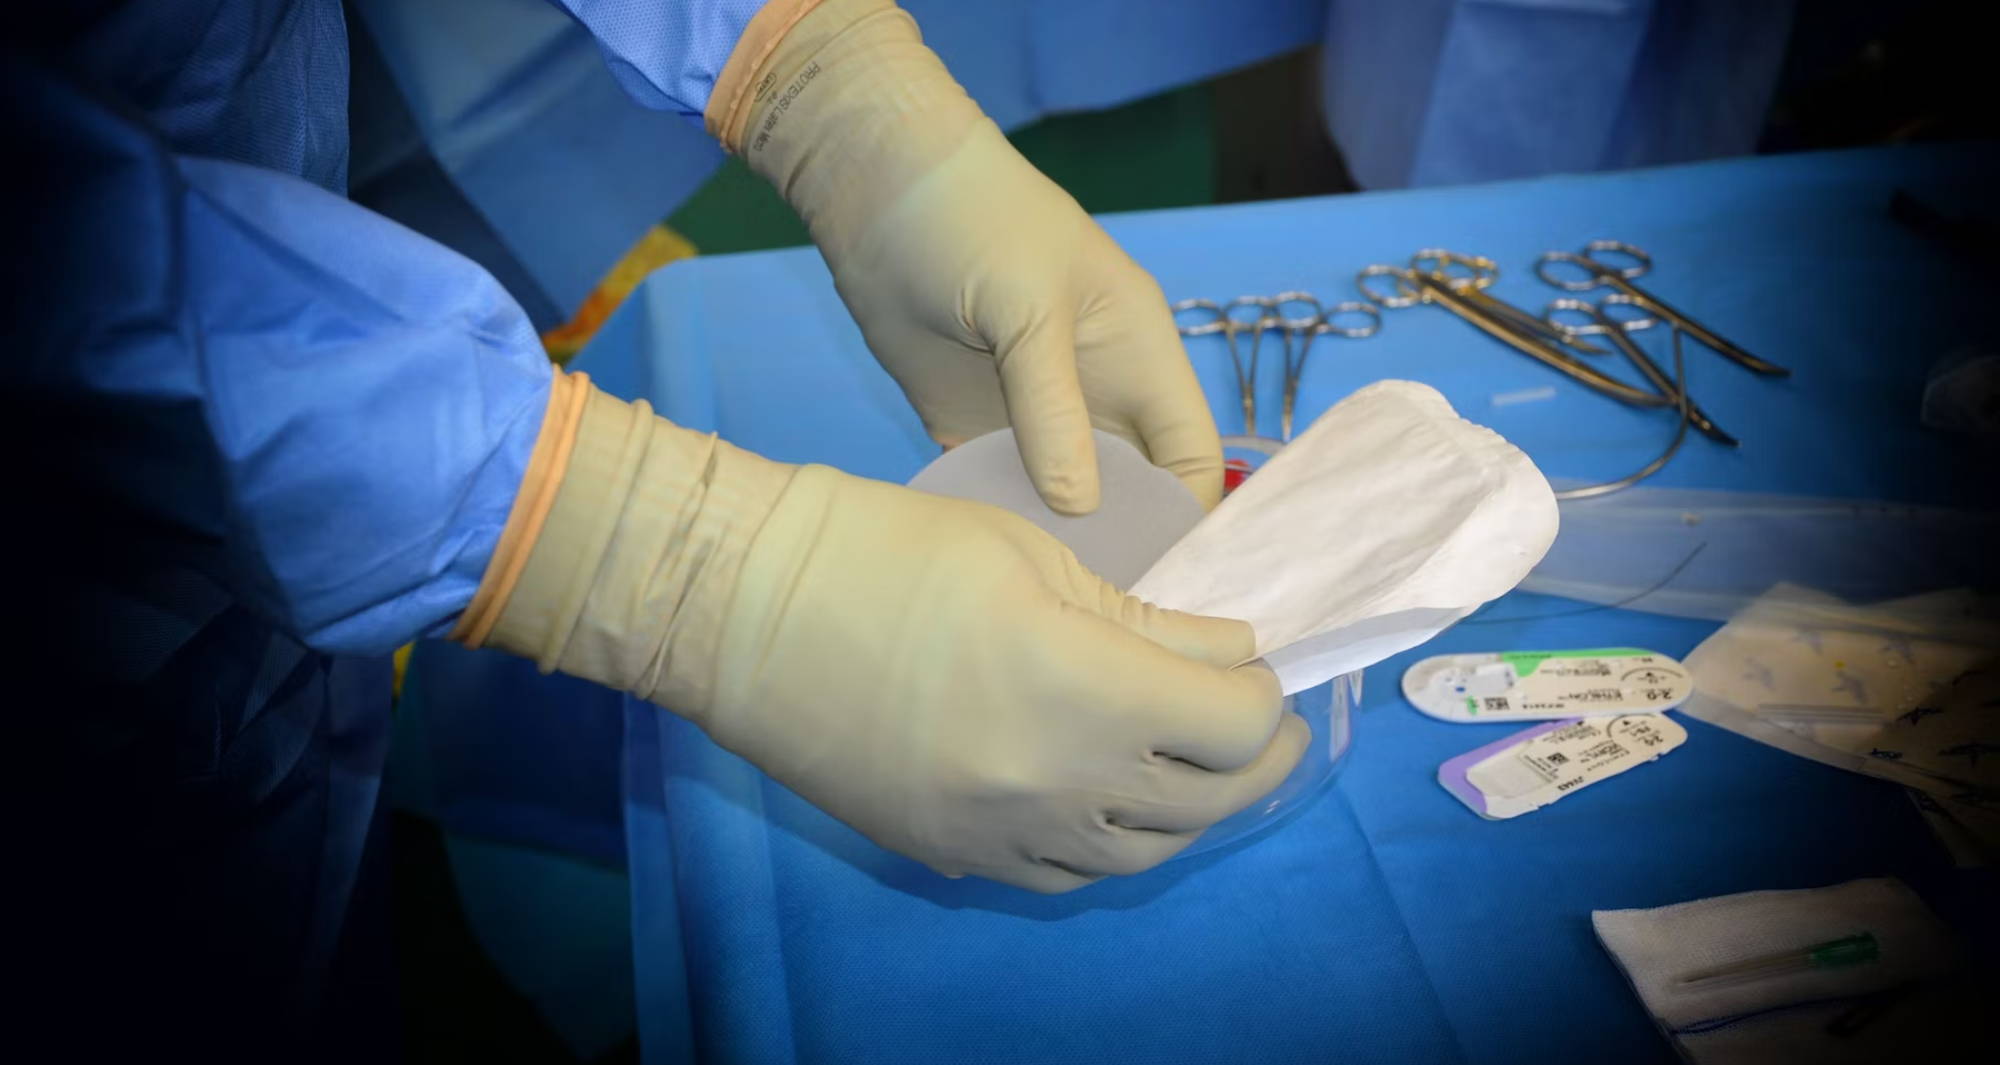 a gloved surgeon opens gauze on a surgical table